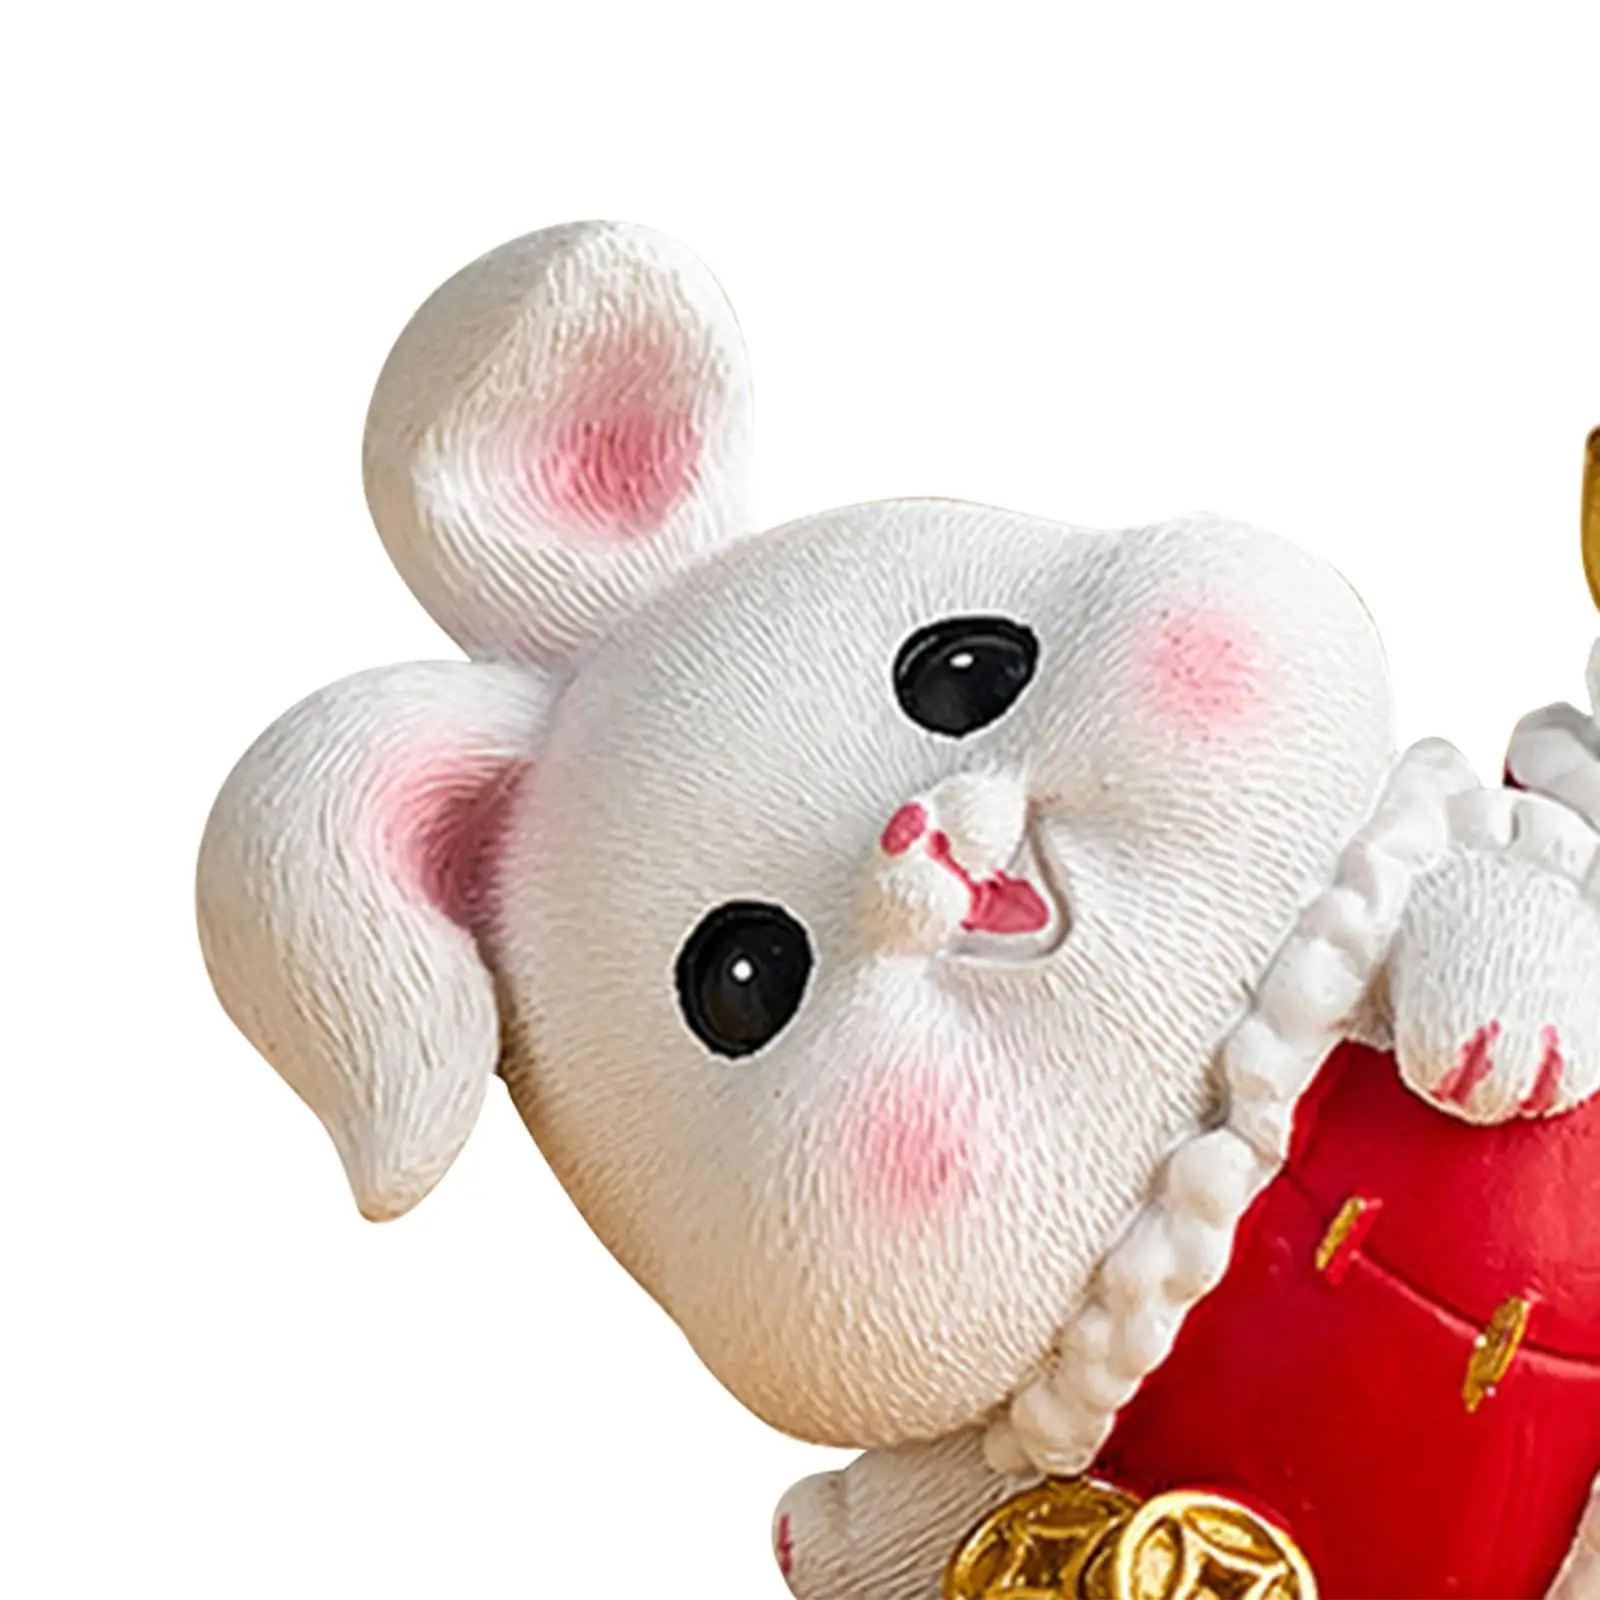 Chinese New Year Rabbit Statue Miniature Crafts Desktop Ornament for Bedroom